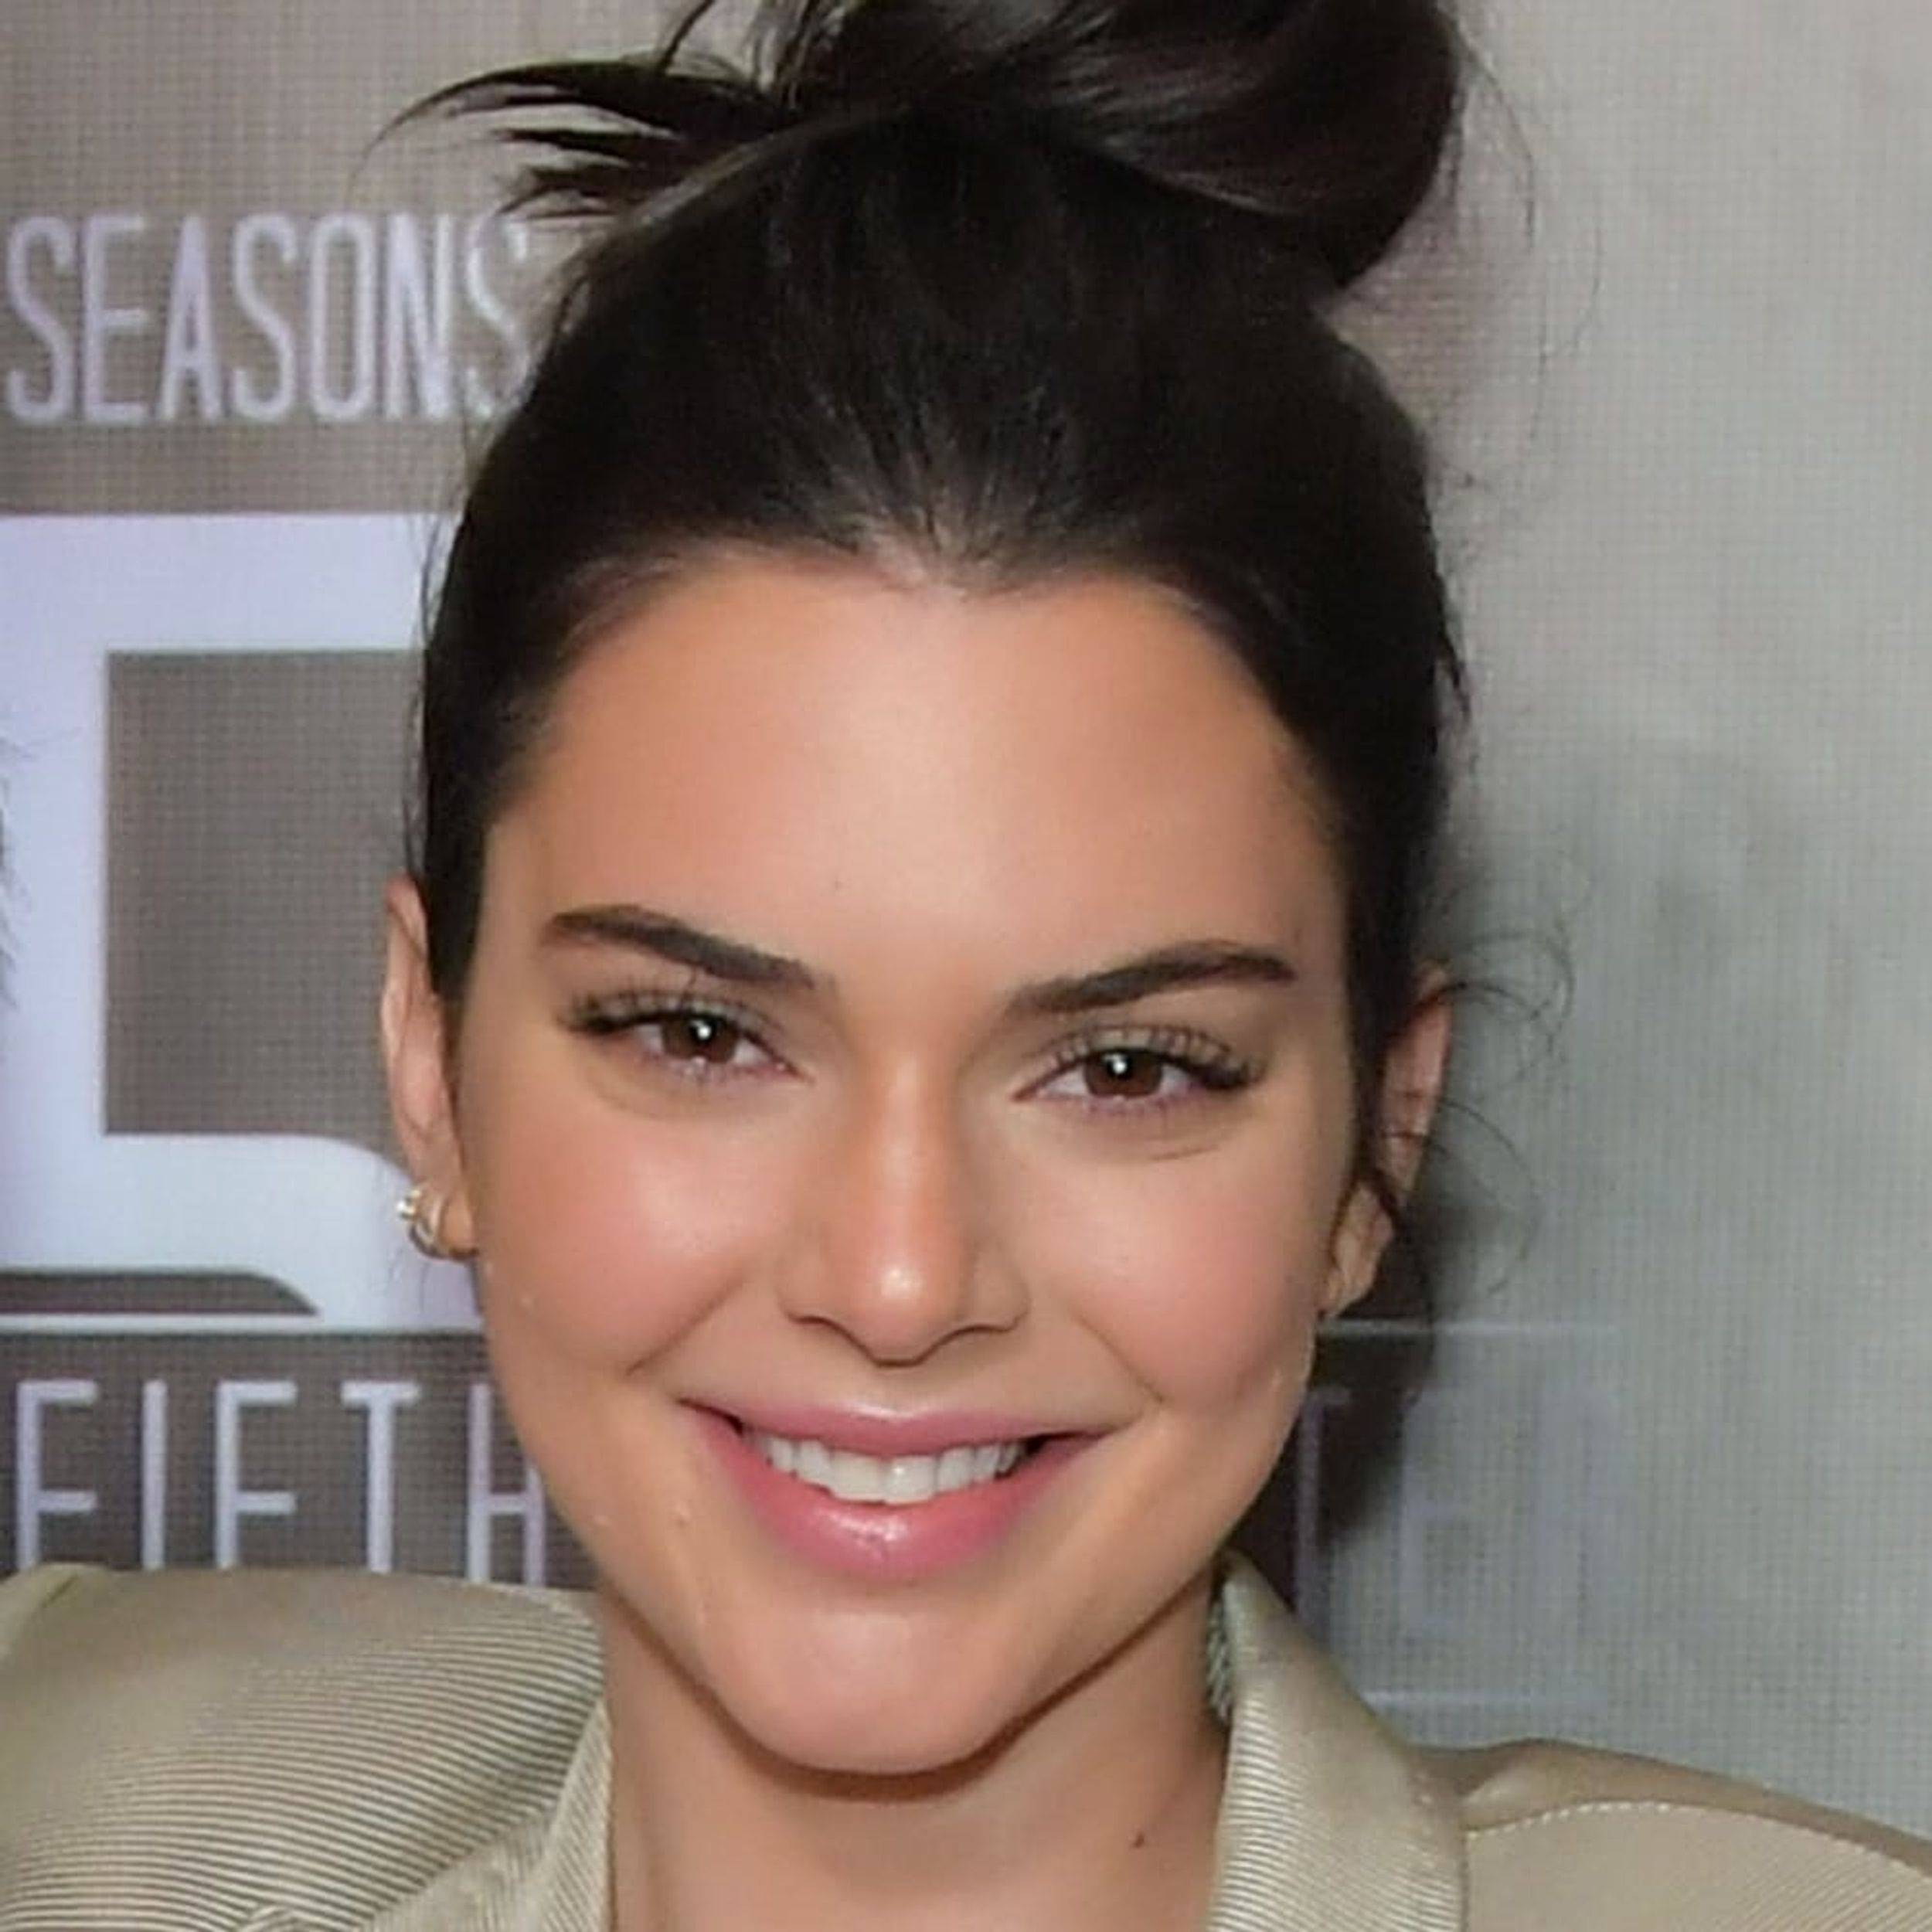 Kendall Jenner’s Response to Speculation She’s Pregnant Will Make You Cheer